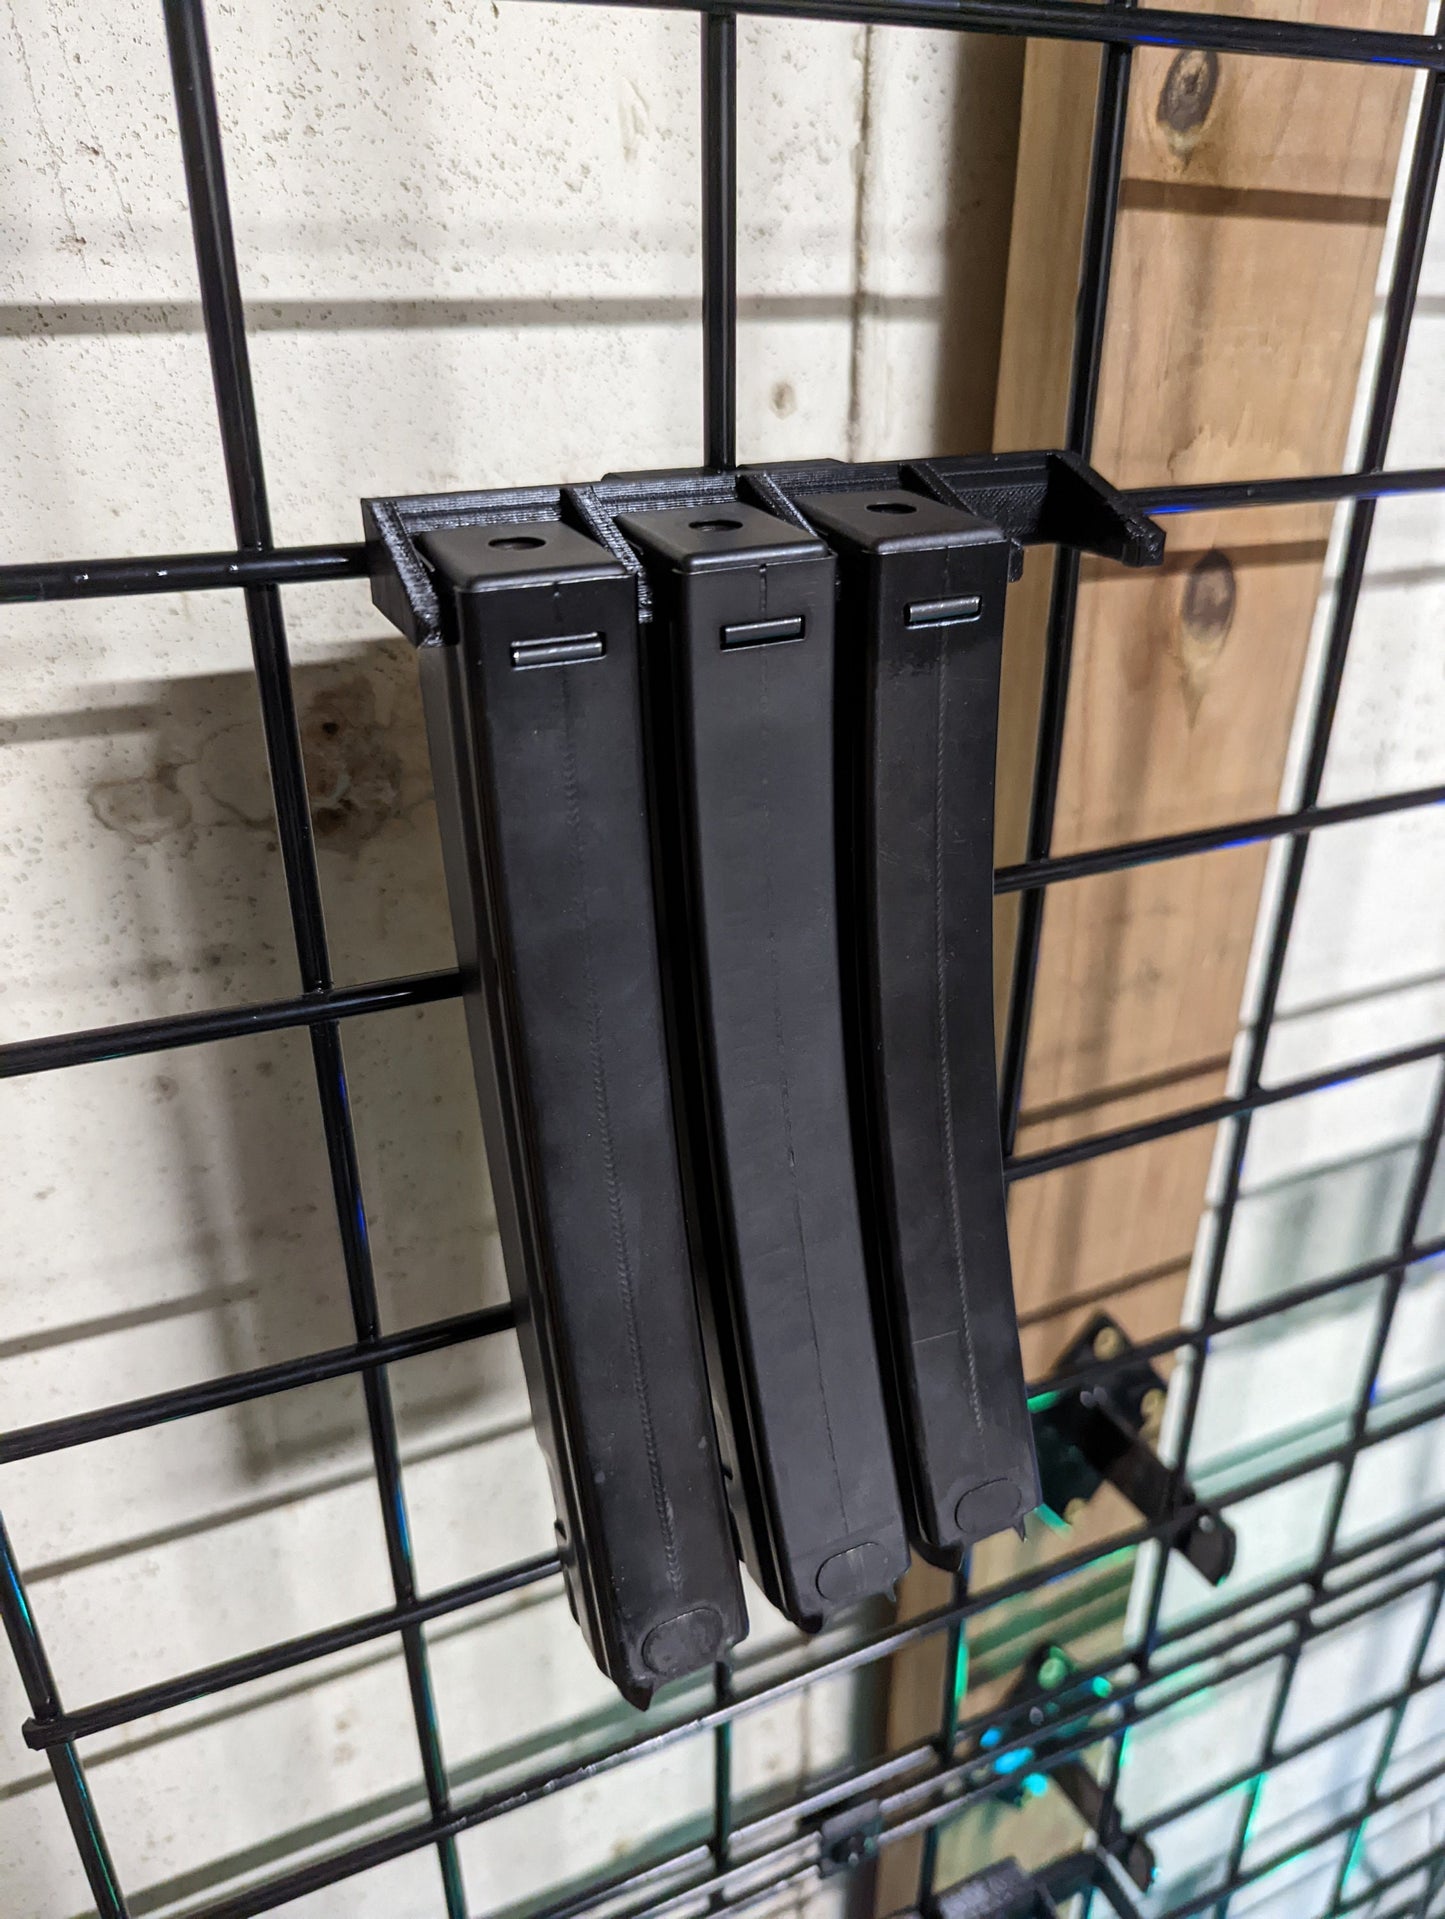 Mount for HK MP5 9/40/10 Mags - Gridwall | Magazine Holder Storage Rack